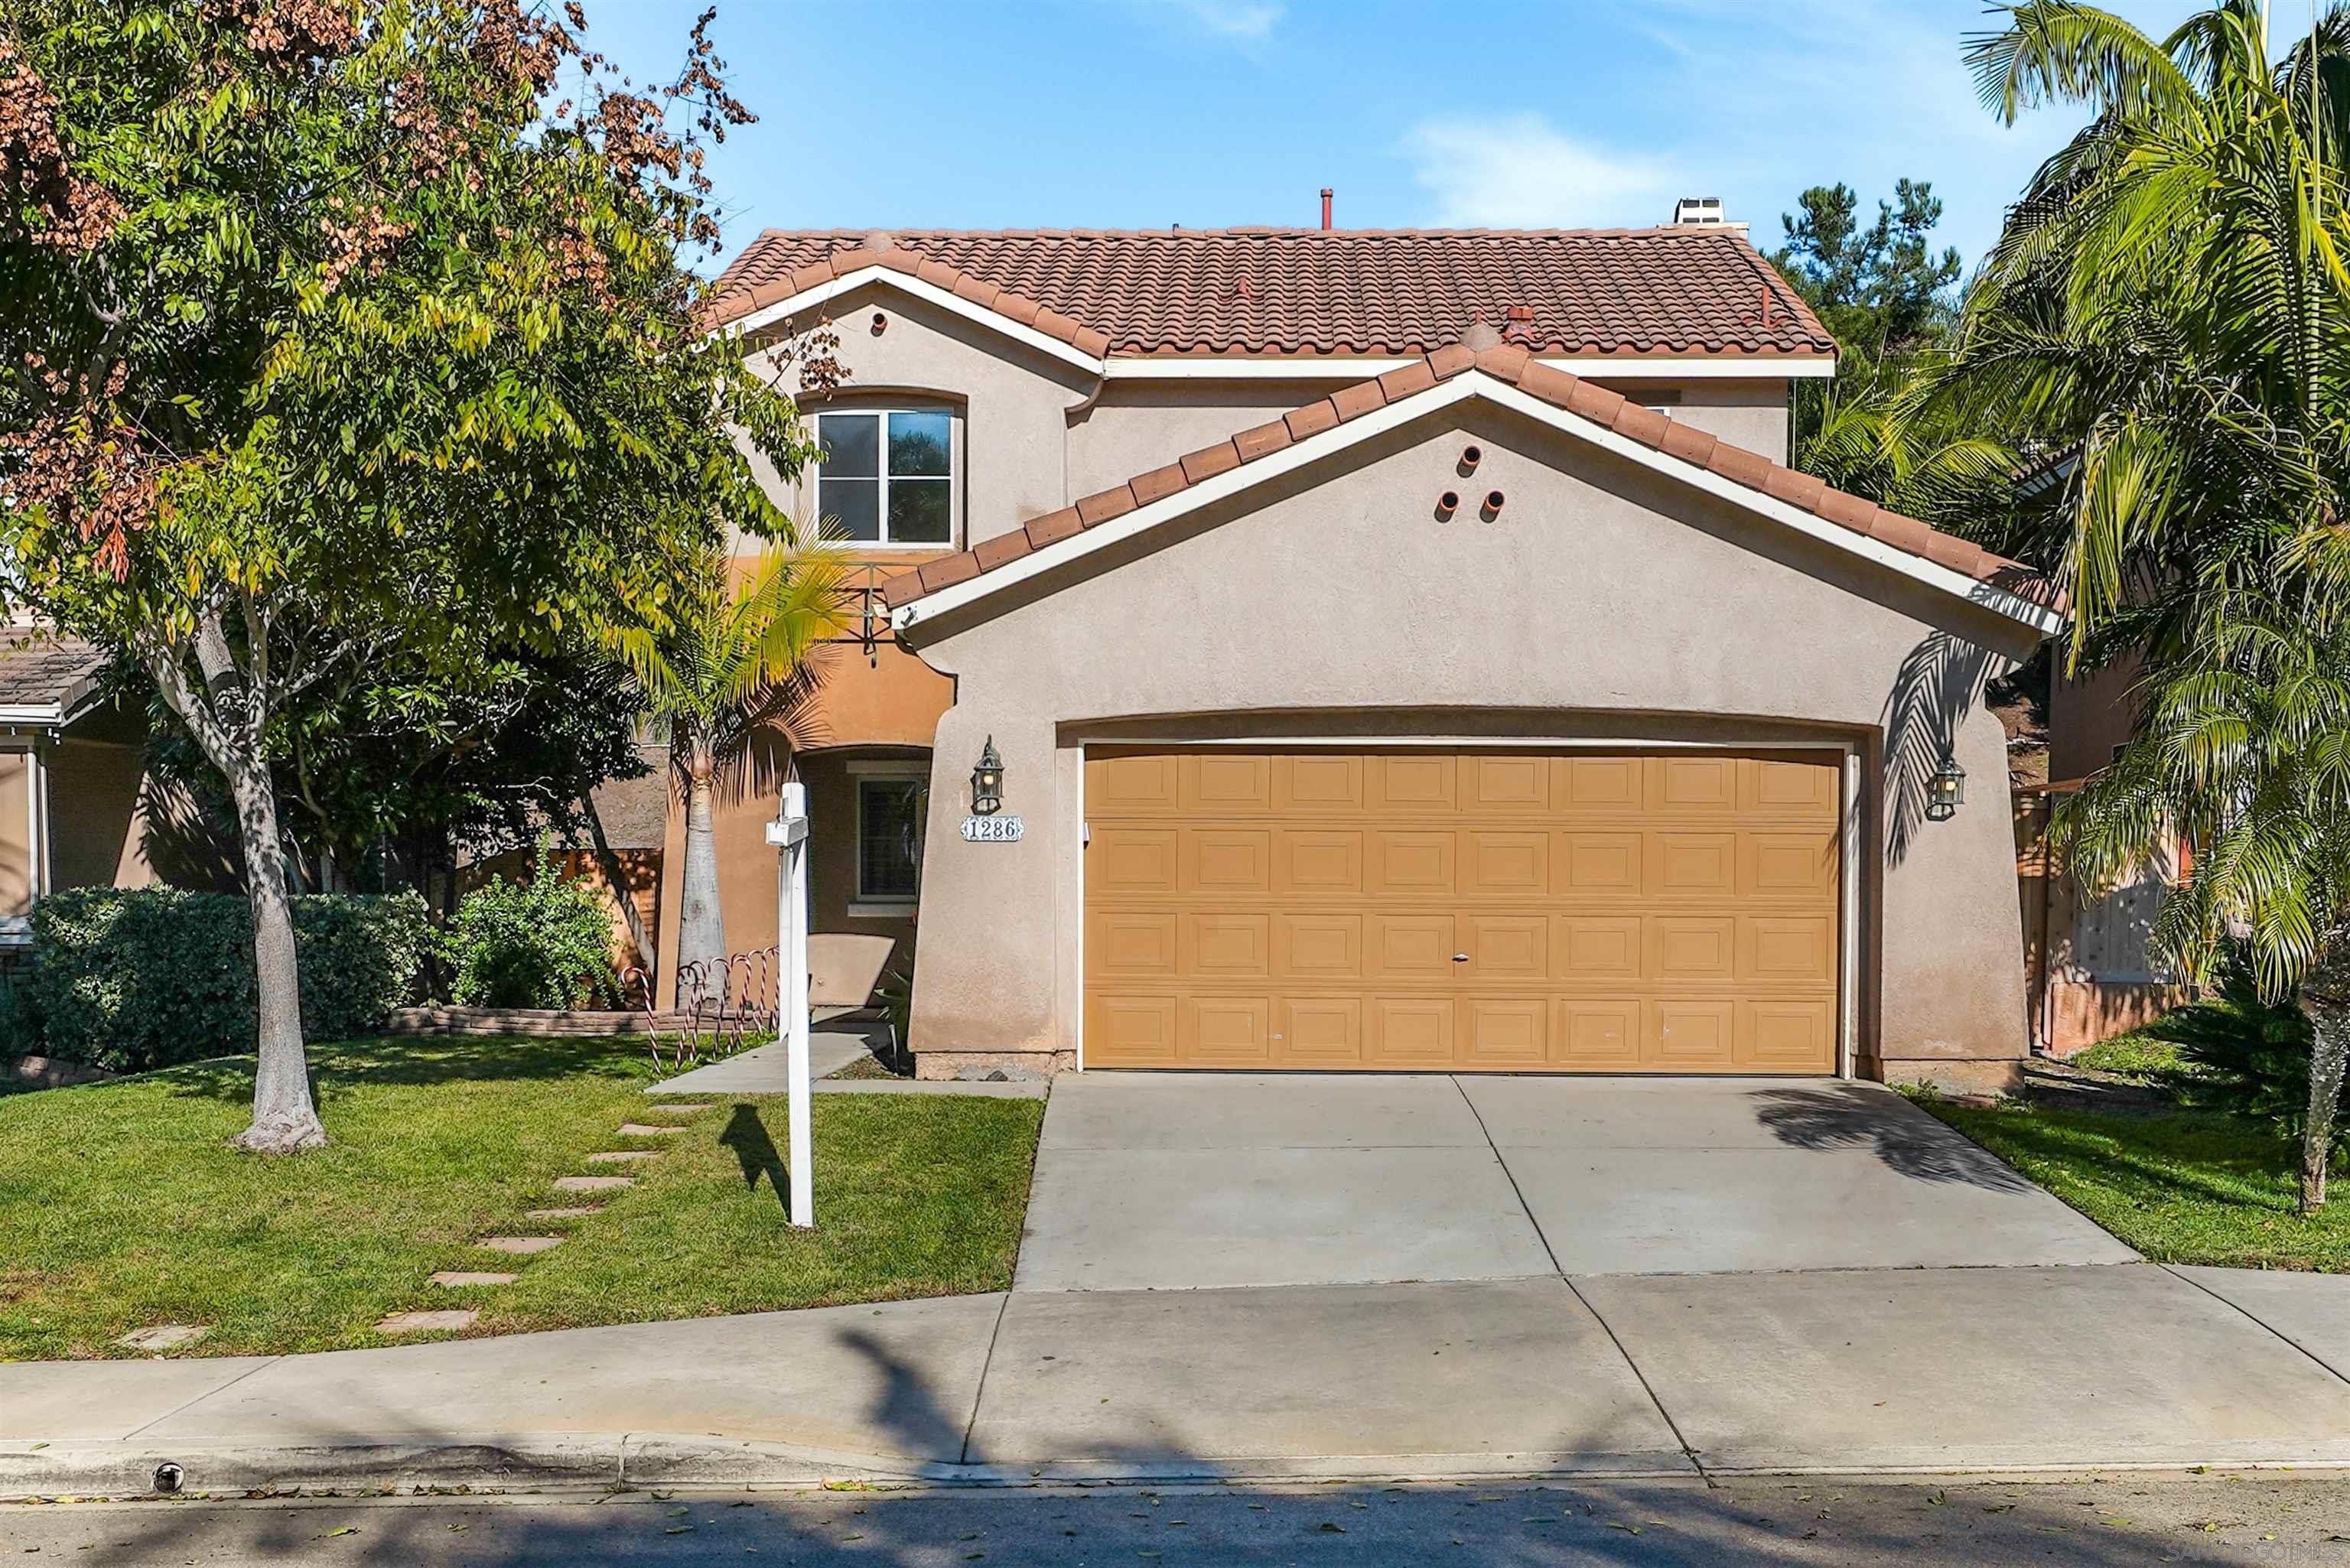 Open House. Open House on Sunday, December 19, 2021 12:00PM - 3:00PM